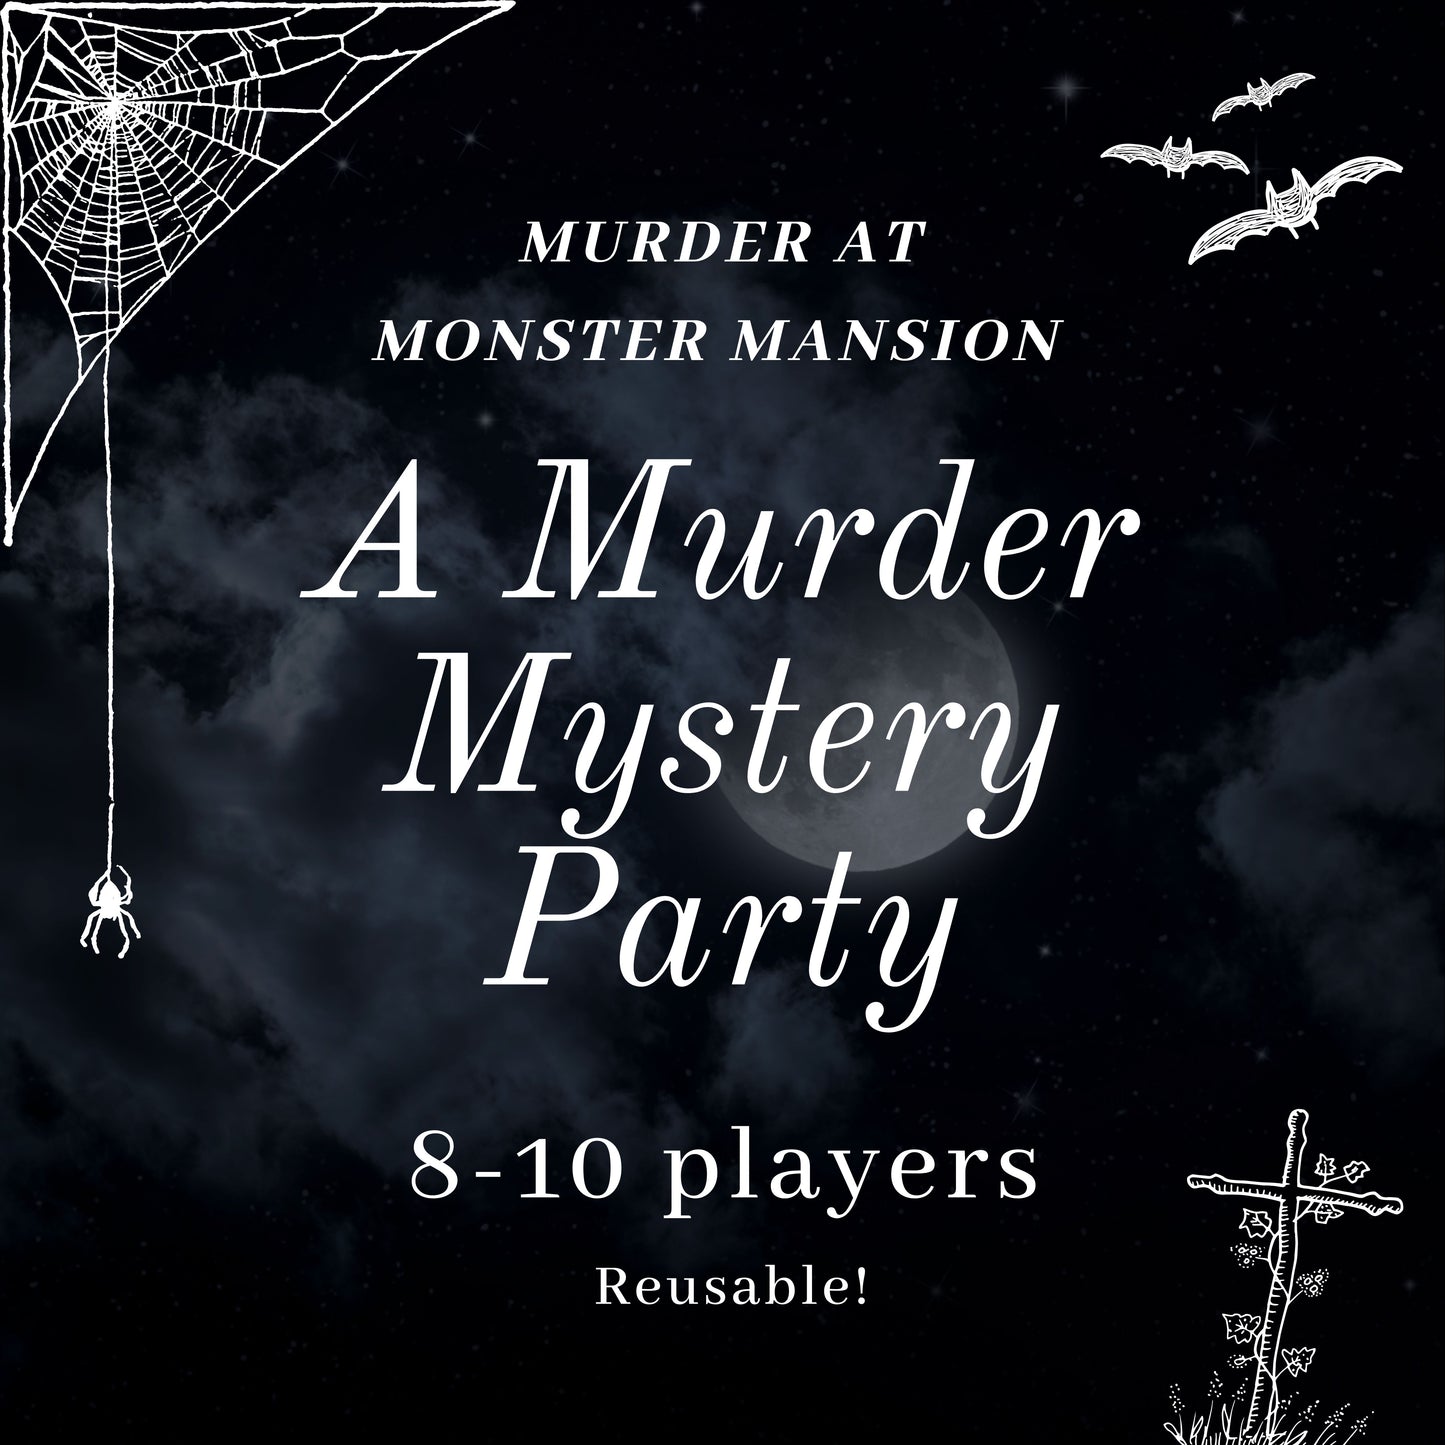 Fun and colourful fully scripted Monster Mansion themed murder mystery party game for 8-10 players